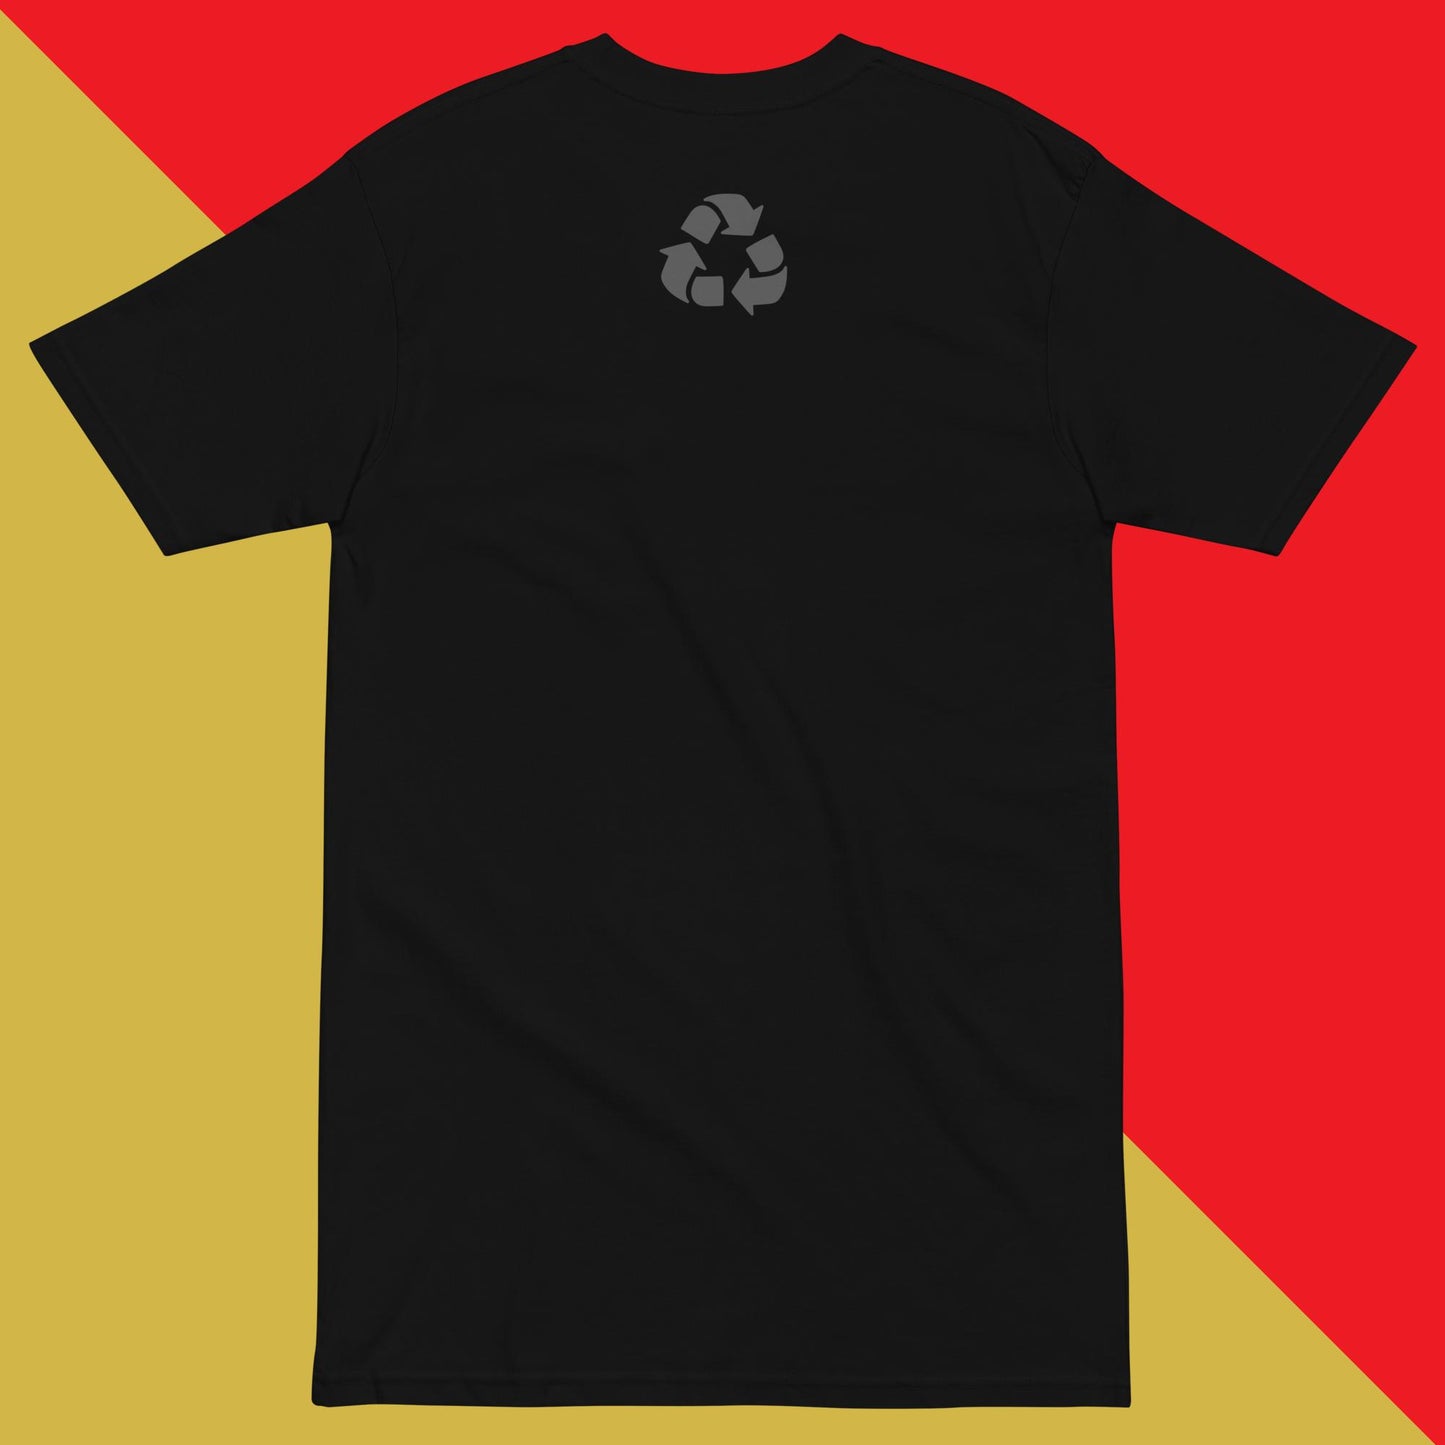 Red/Black Cotton Peaceful Energy Tee S-XL